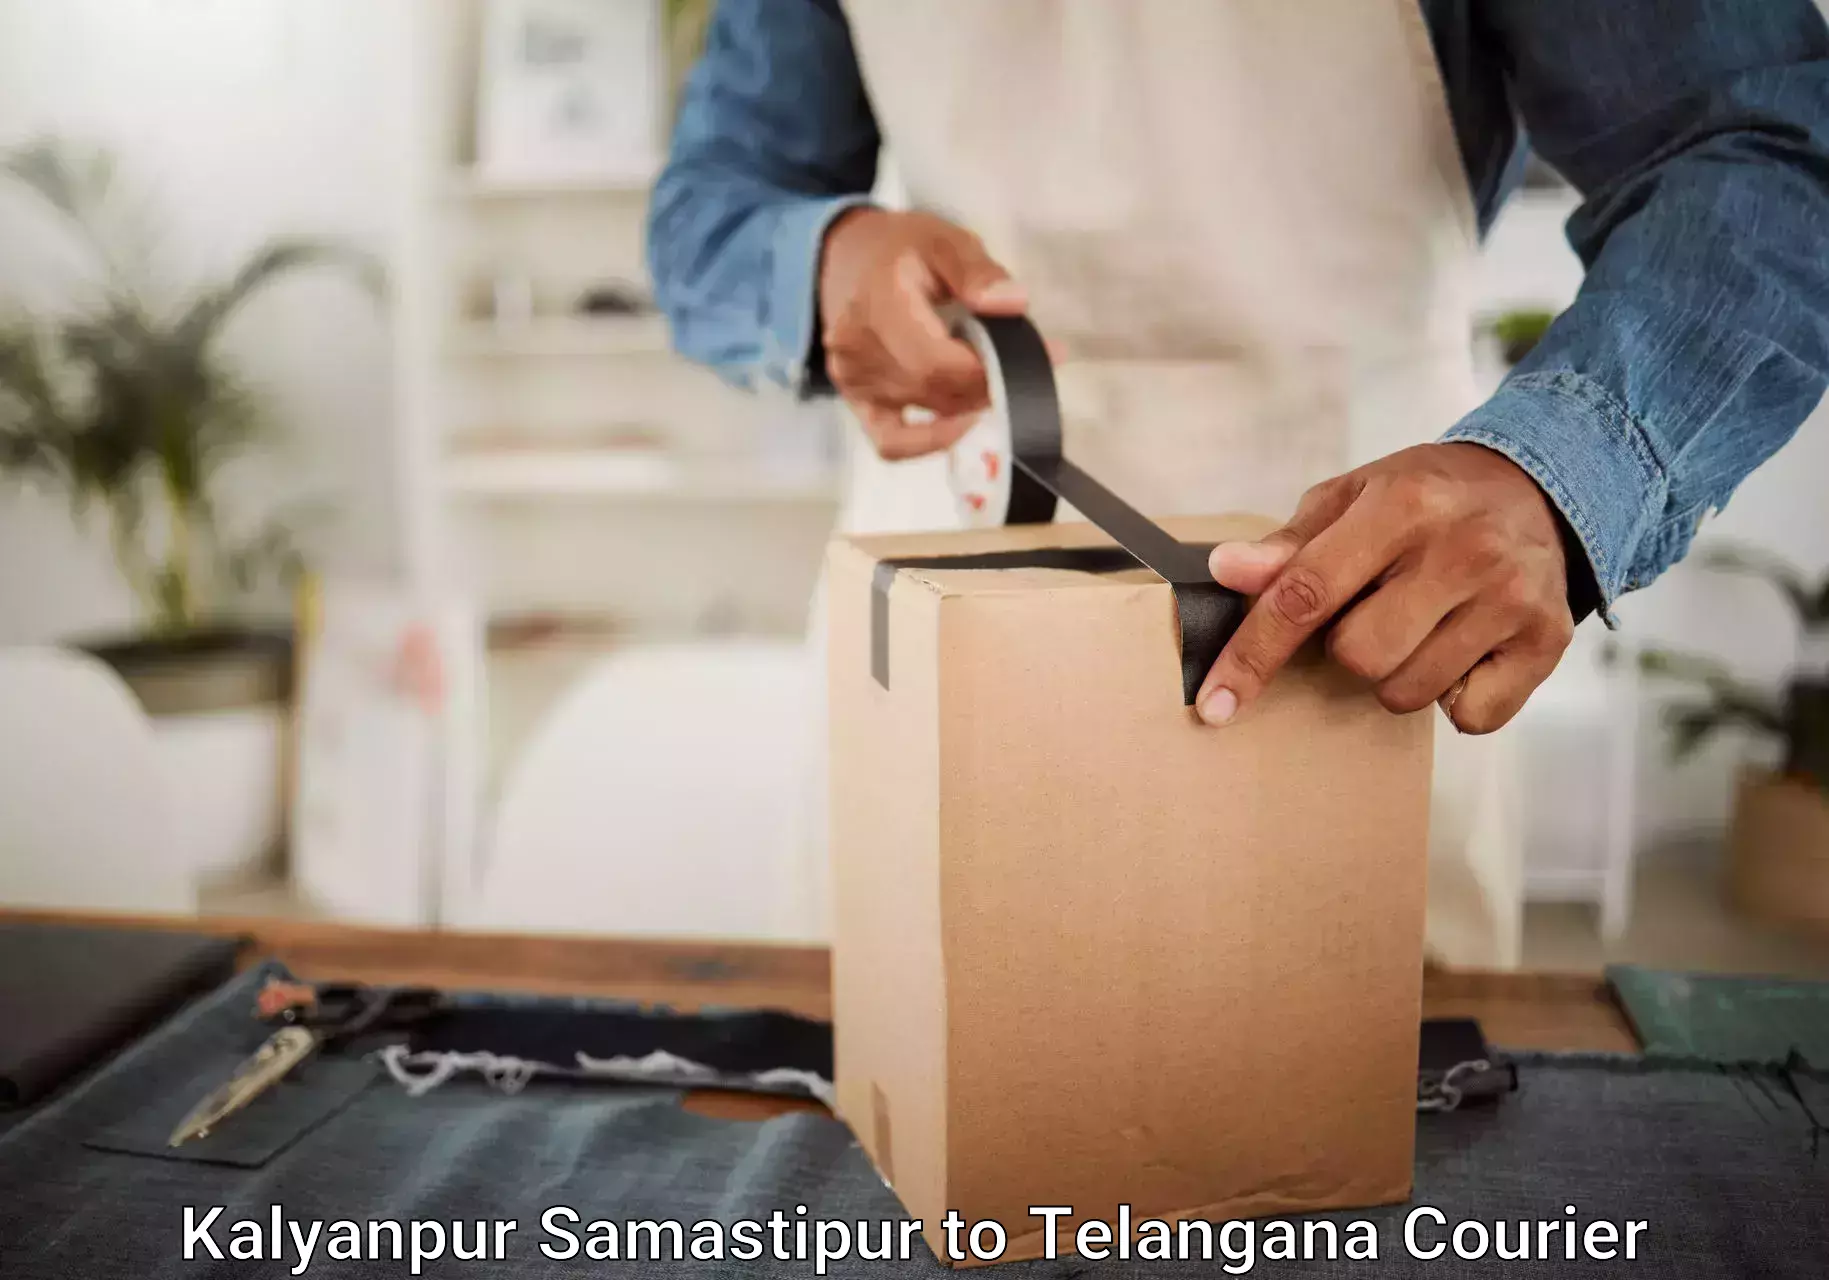 Luggage shipment specialists in Kalyanpur Samastipur to Adilabad